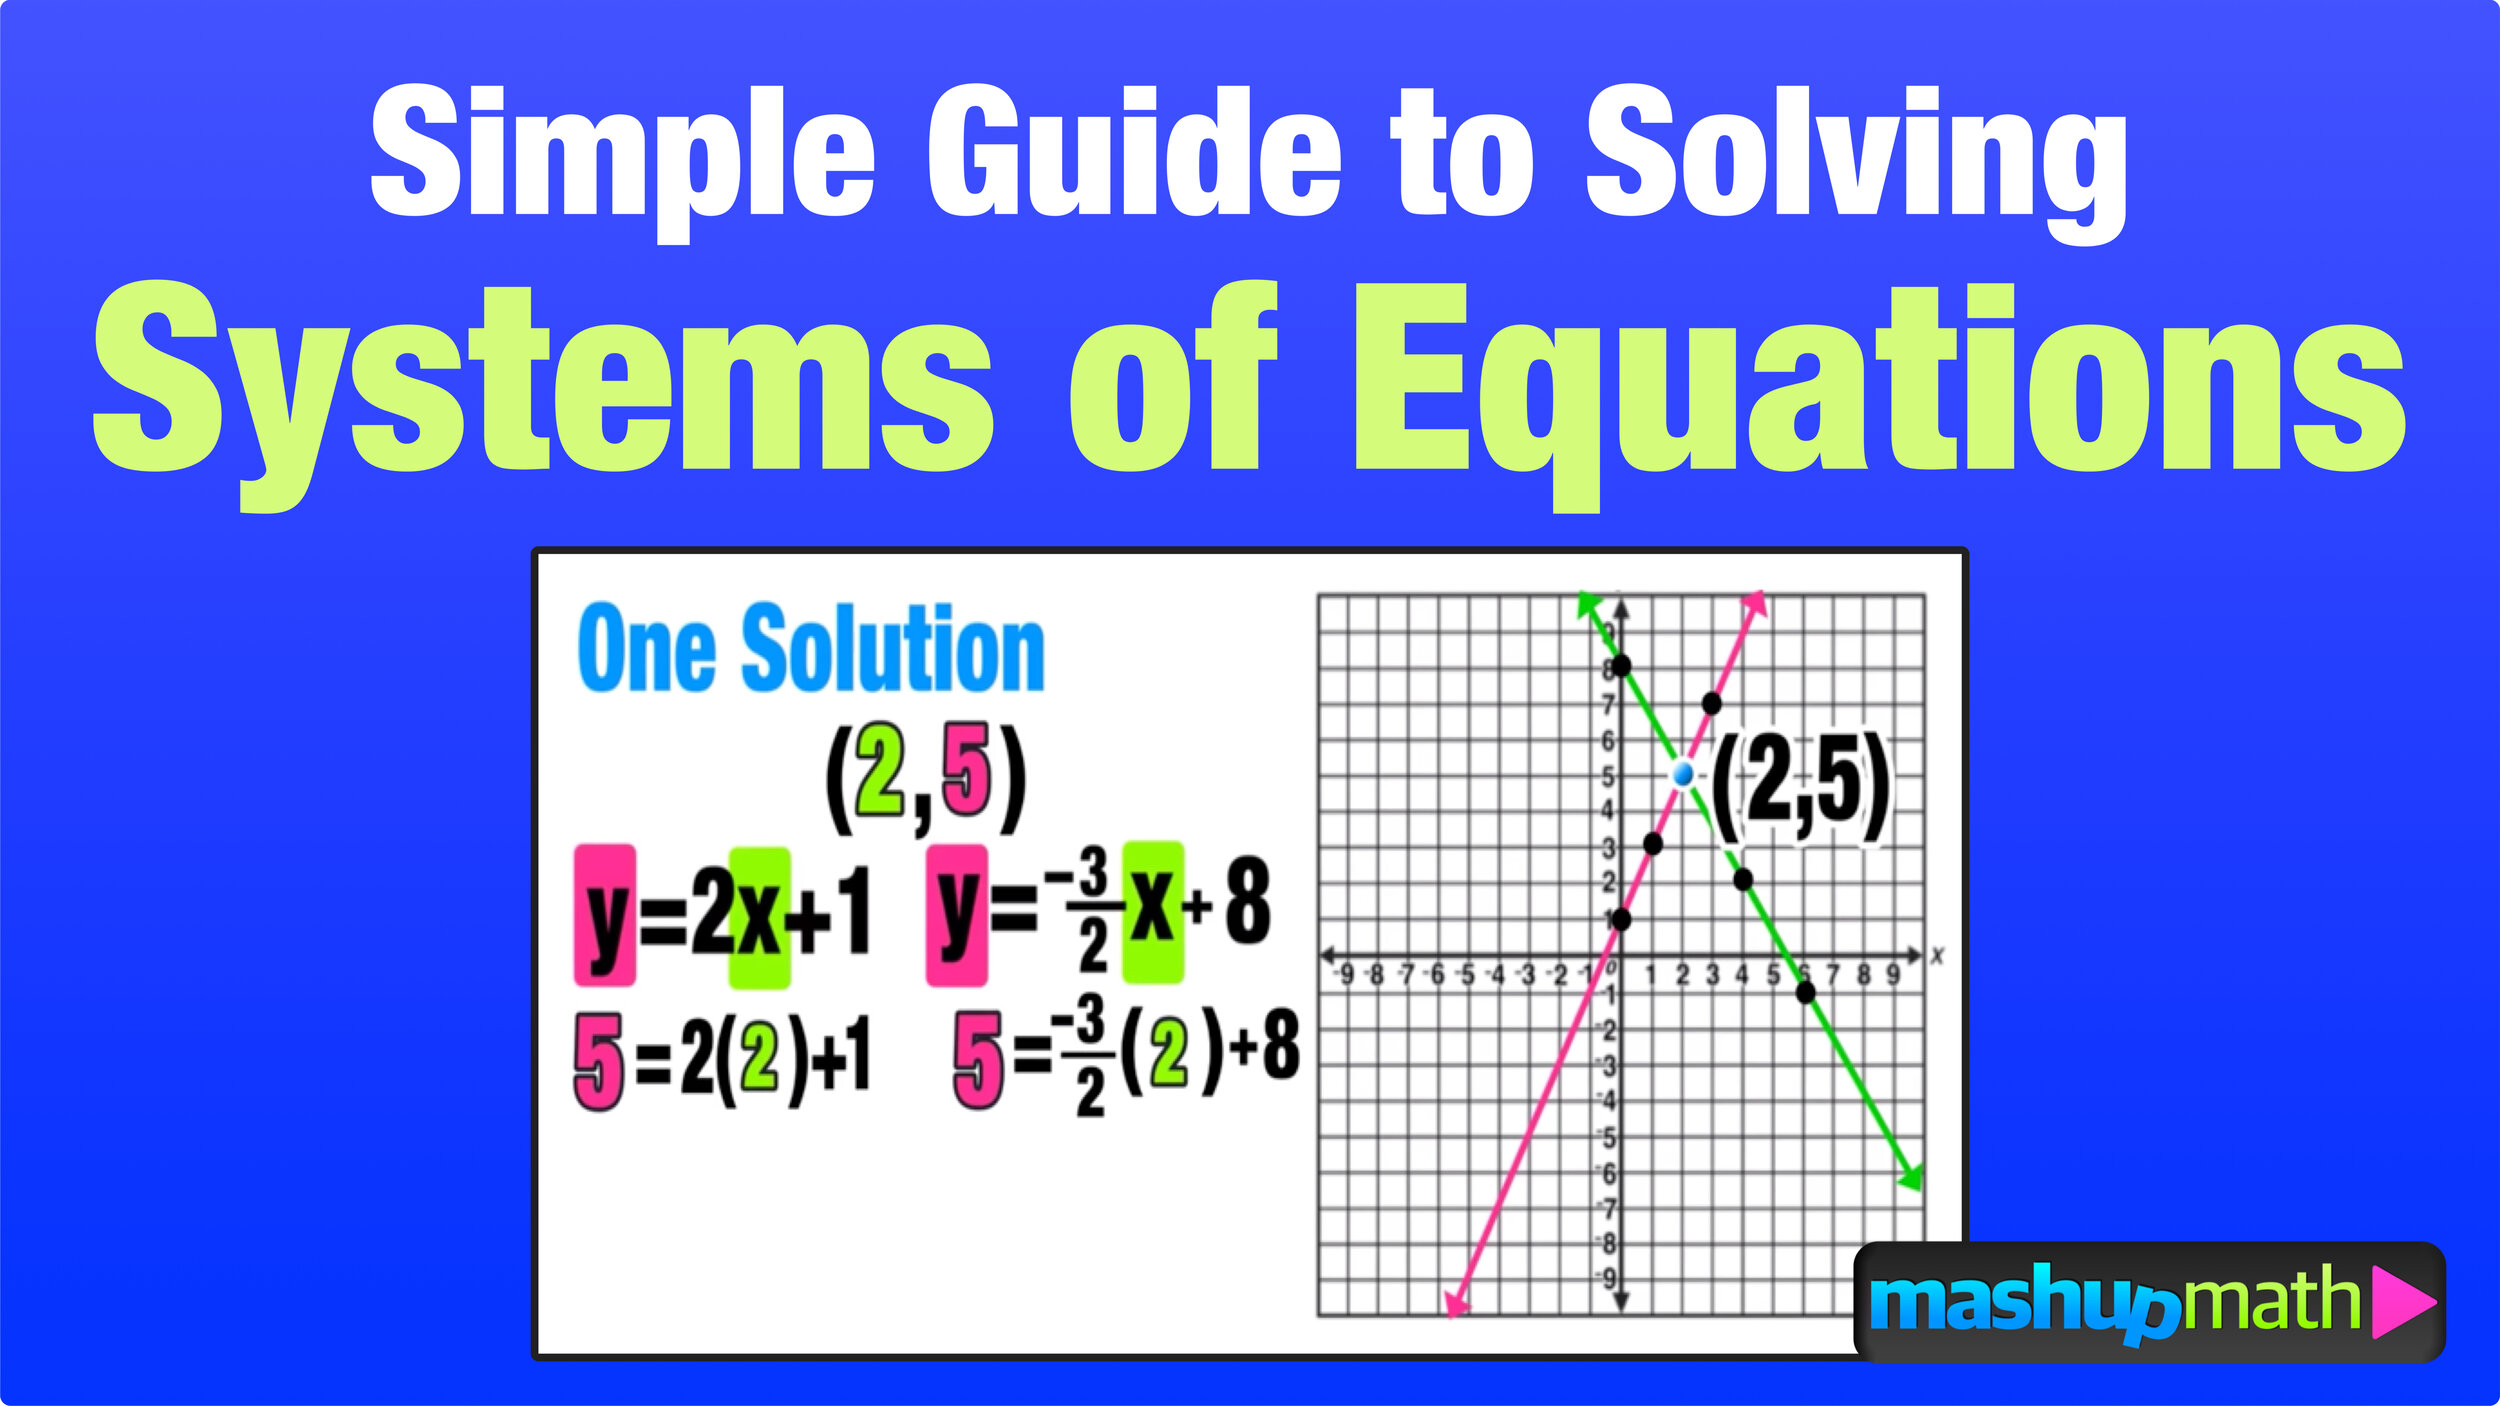 Systems of Equations Explained! — Math